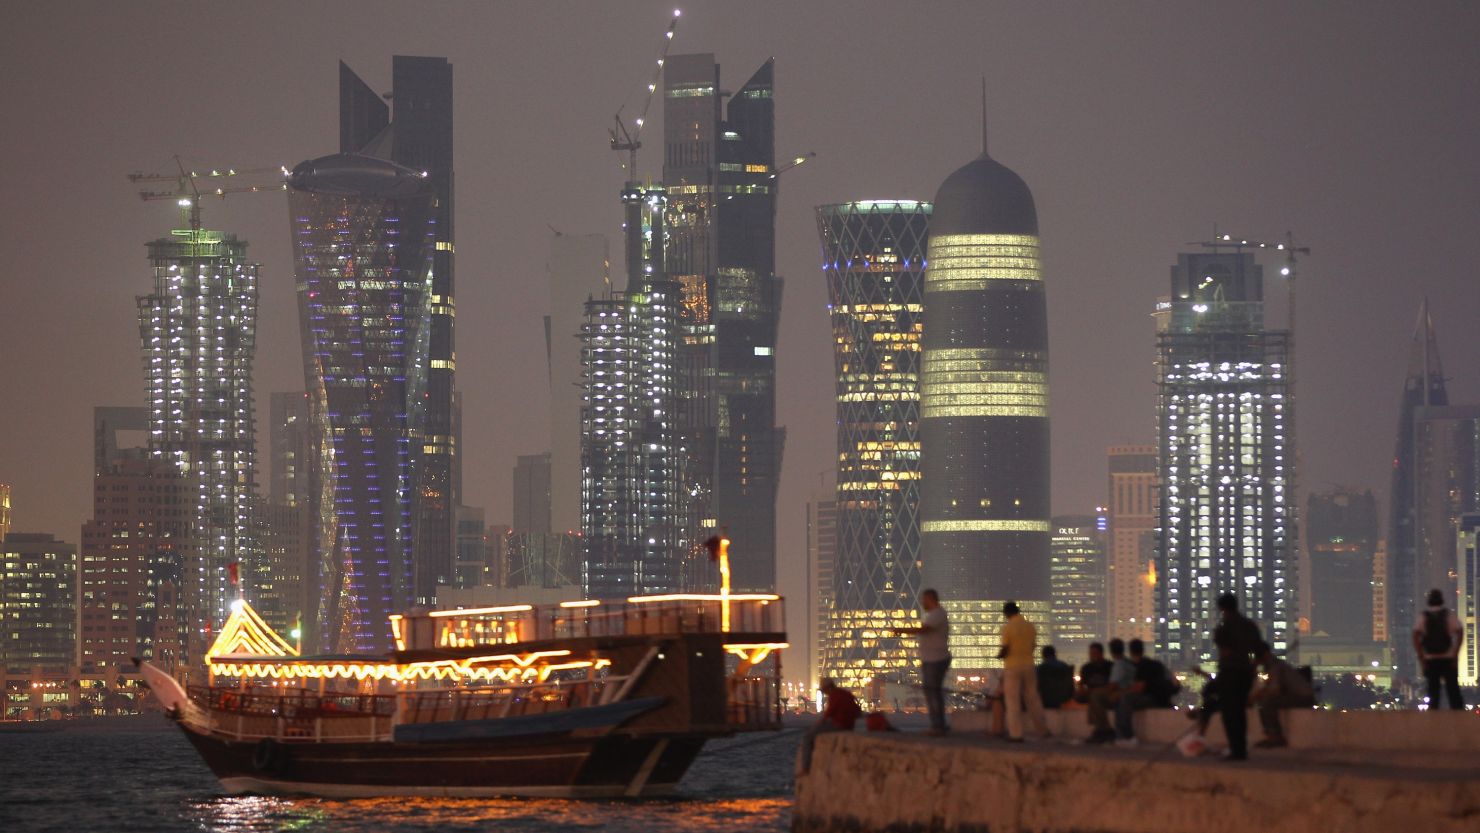 (File photo) Qatar sparkles: A boat arrives at a jetty in front of the Doha skyline.